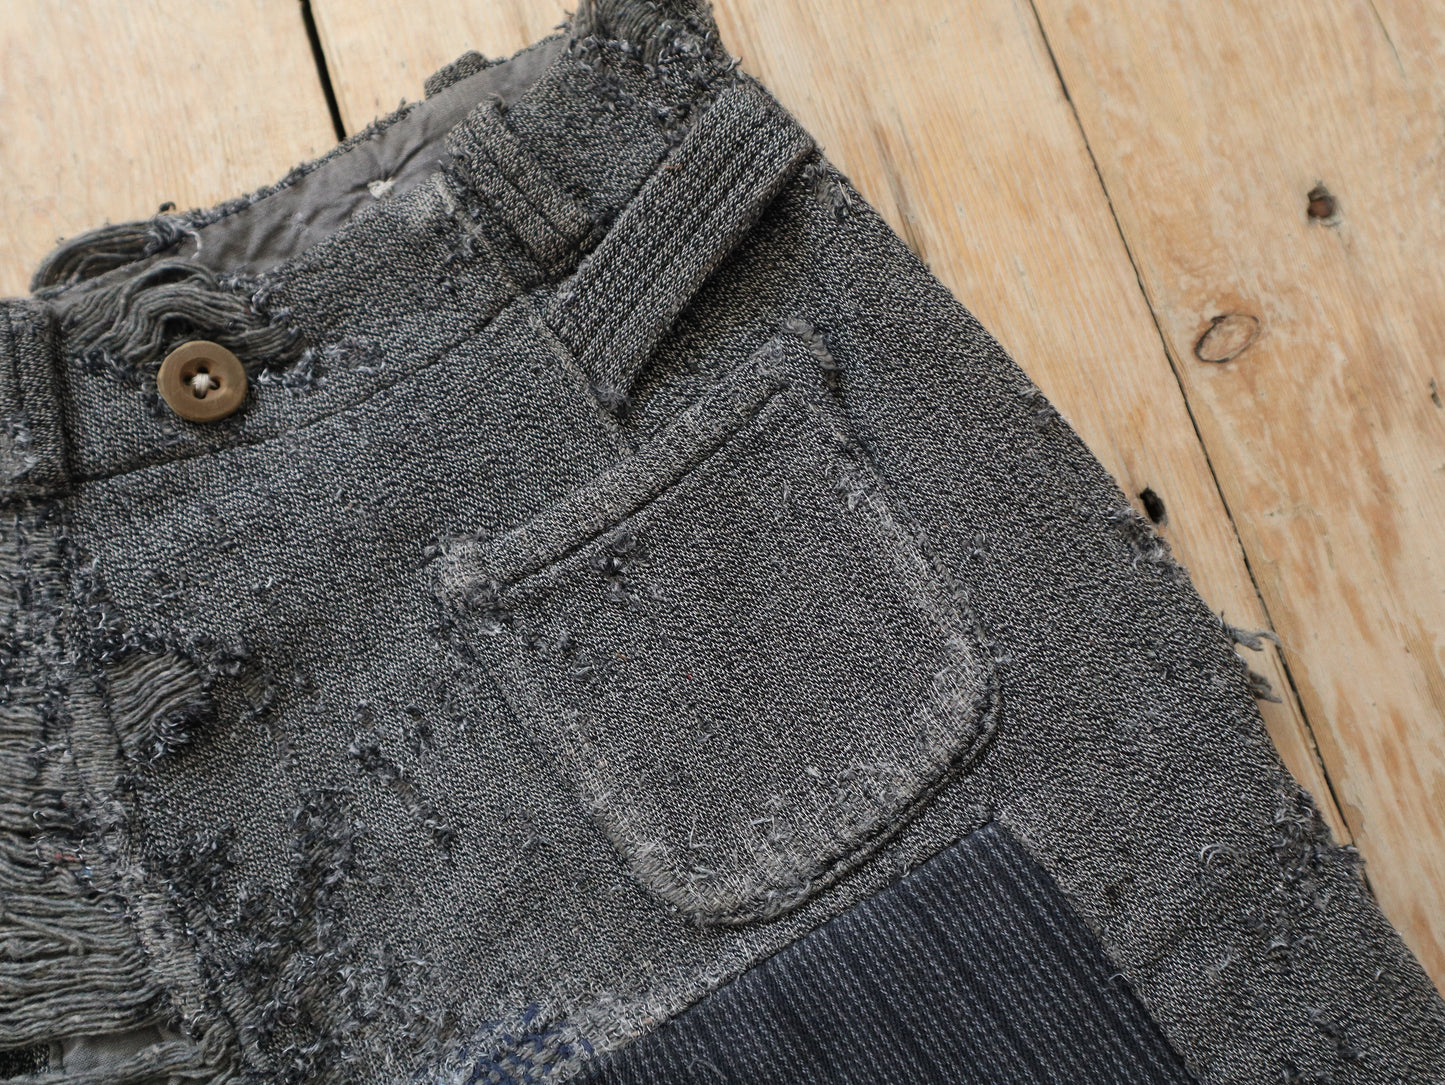 1930s 40s French Workwear Chore Cut Offs Shorts Pants Trousers Grey Salt Pepper Repaired Patched Ripped